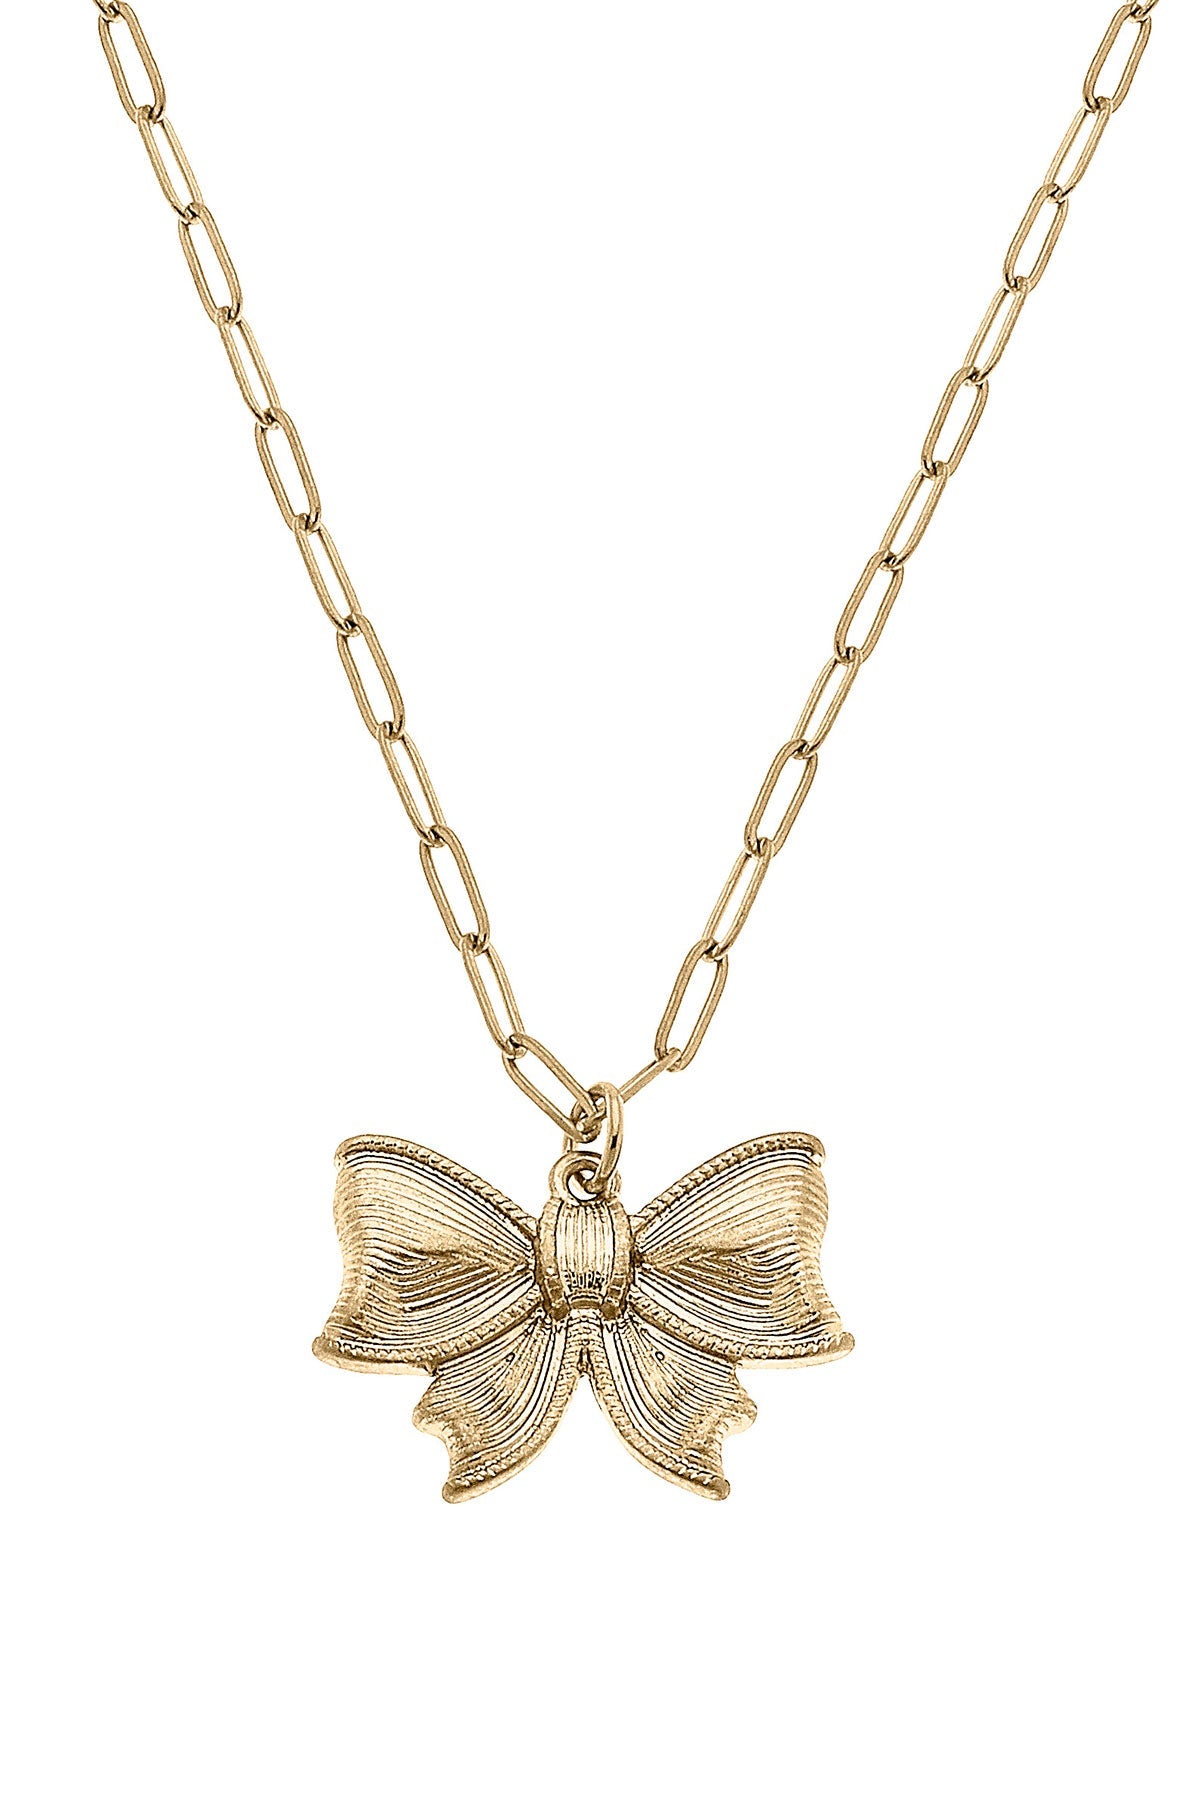 Waverly Bow Pendant Necklace in Worn Gold by CANVAS